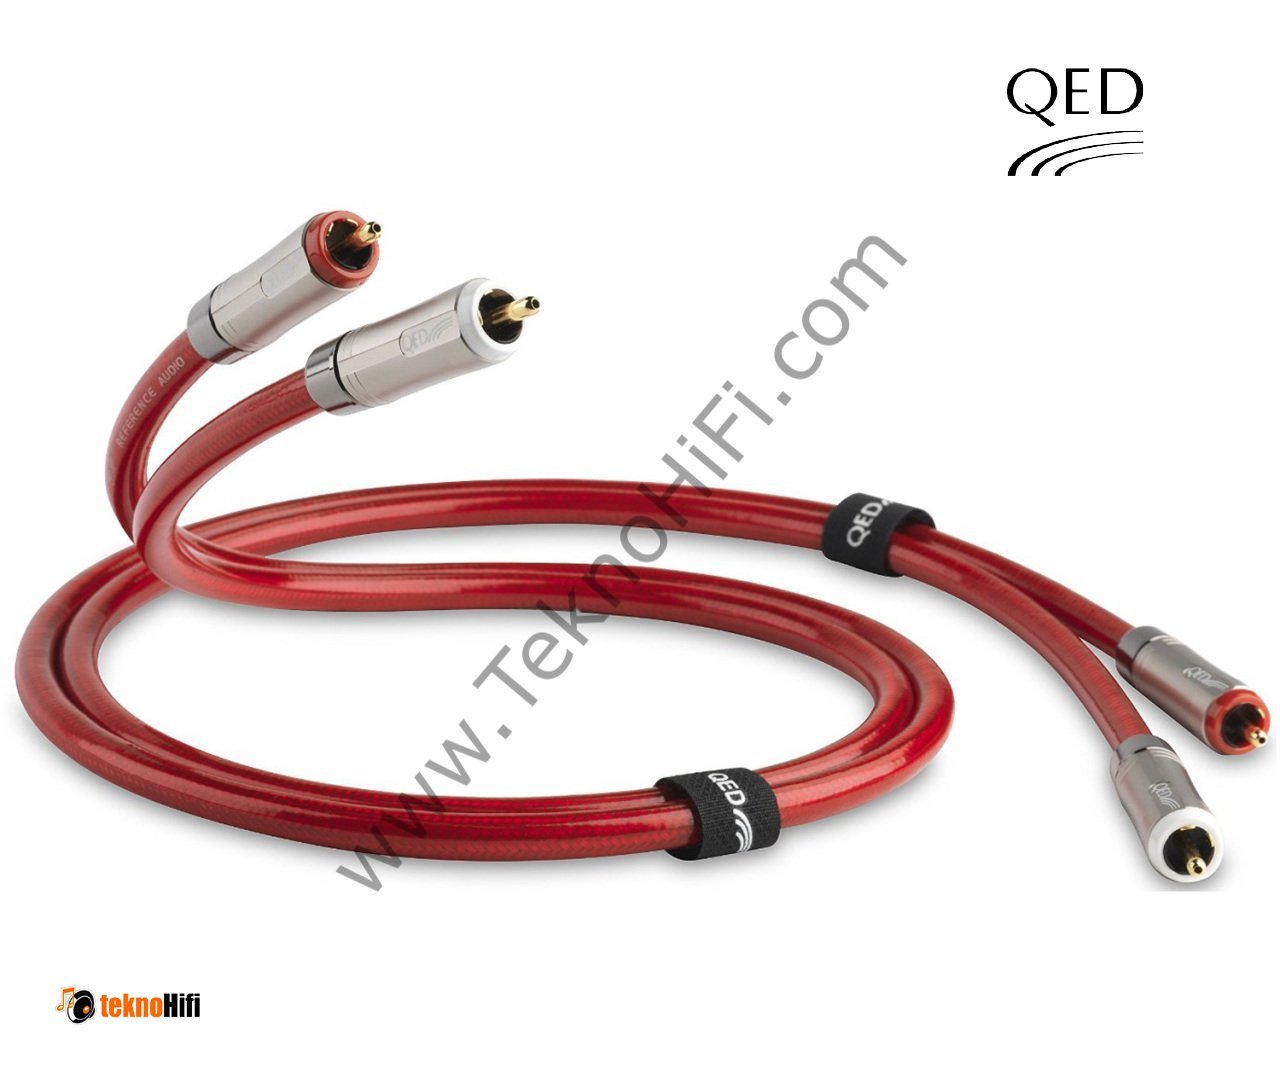 QED QE-2450 Reference Audio 40 RCA Kablo '0,60 Metre'